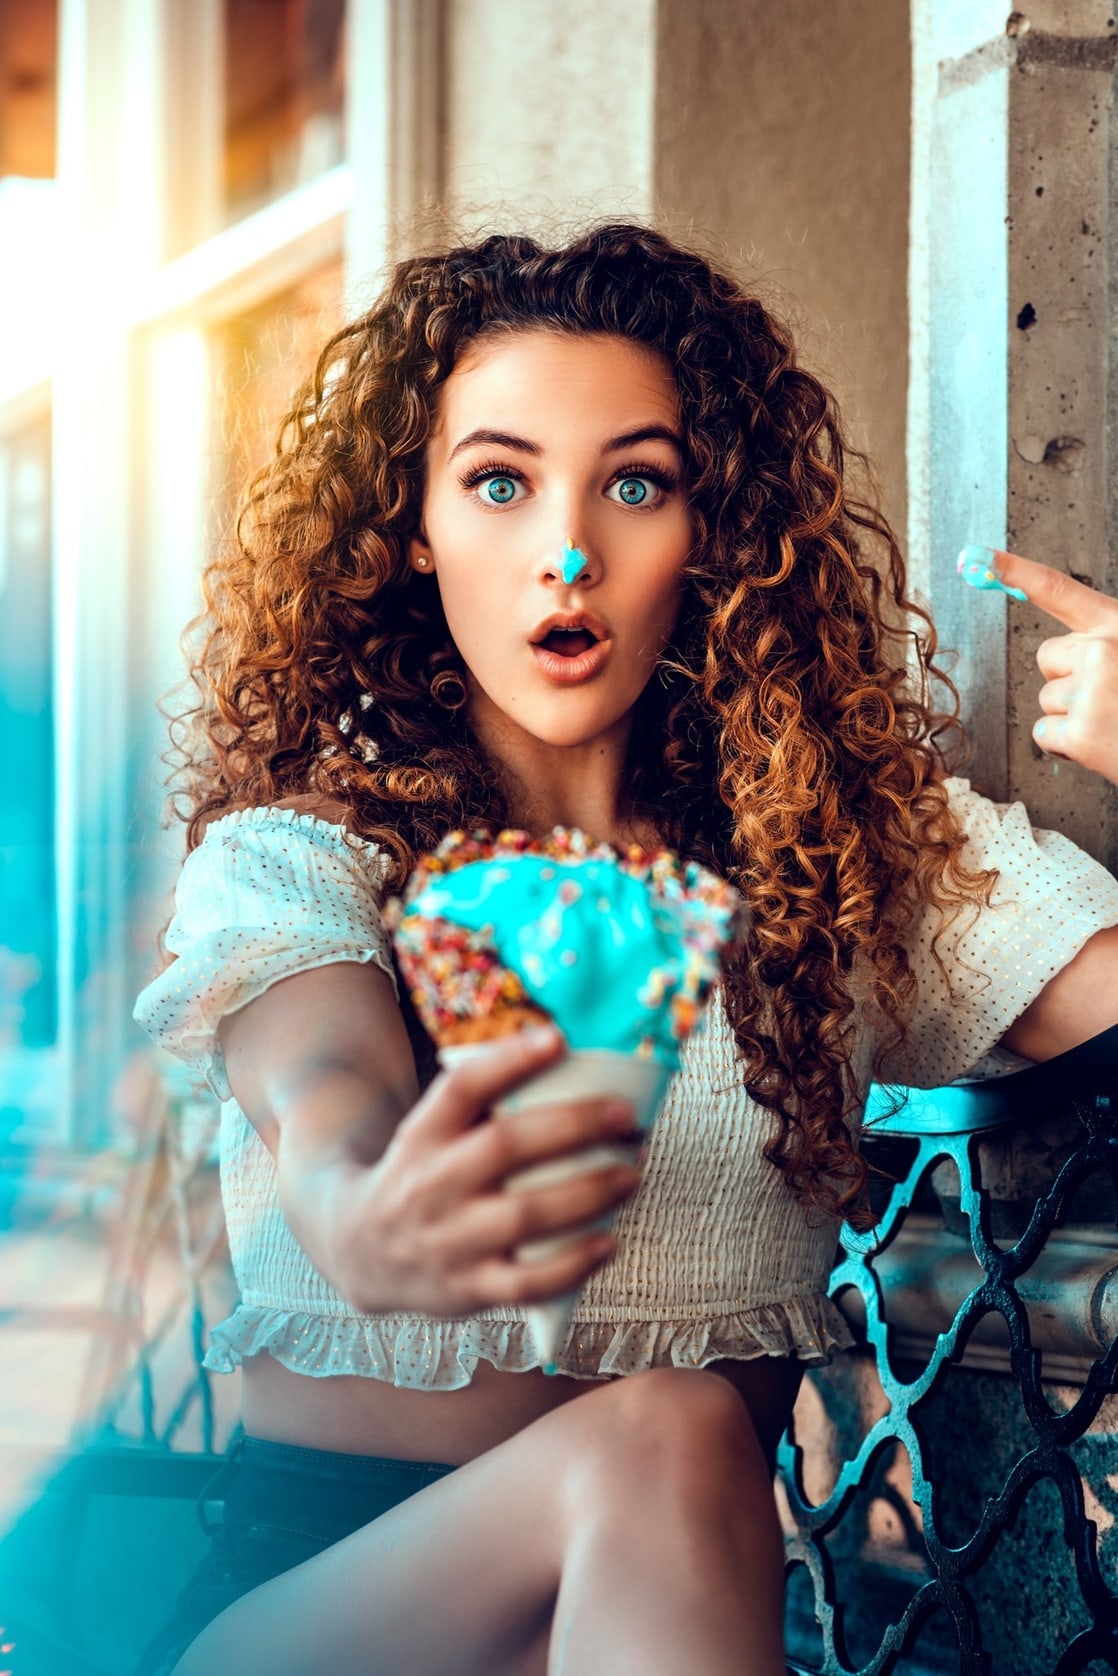 Women Model Redhead Long Hair Sofie Dossi Curly Hair Face Portrait Display Blue Eyes Open Mouth Ice  1118x1676